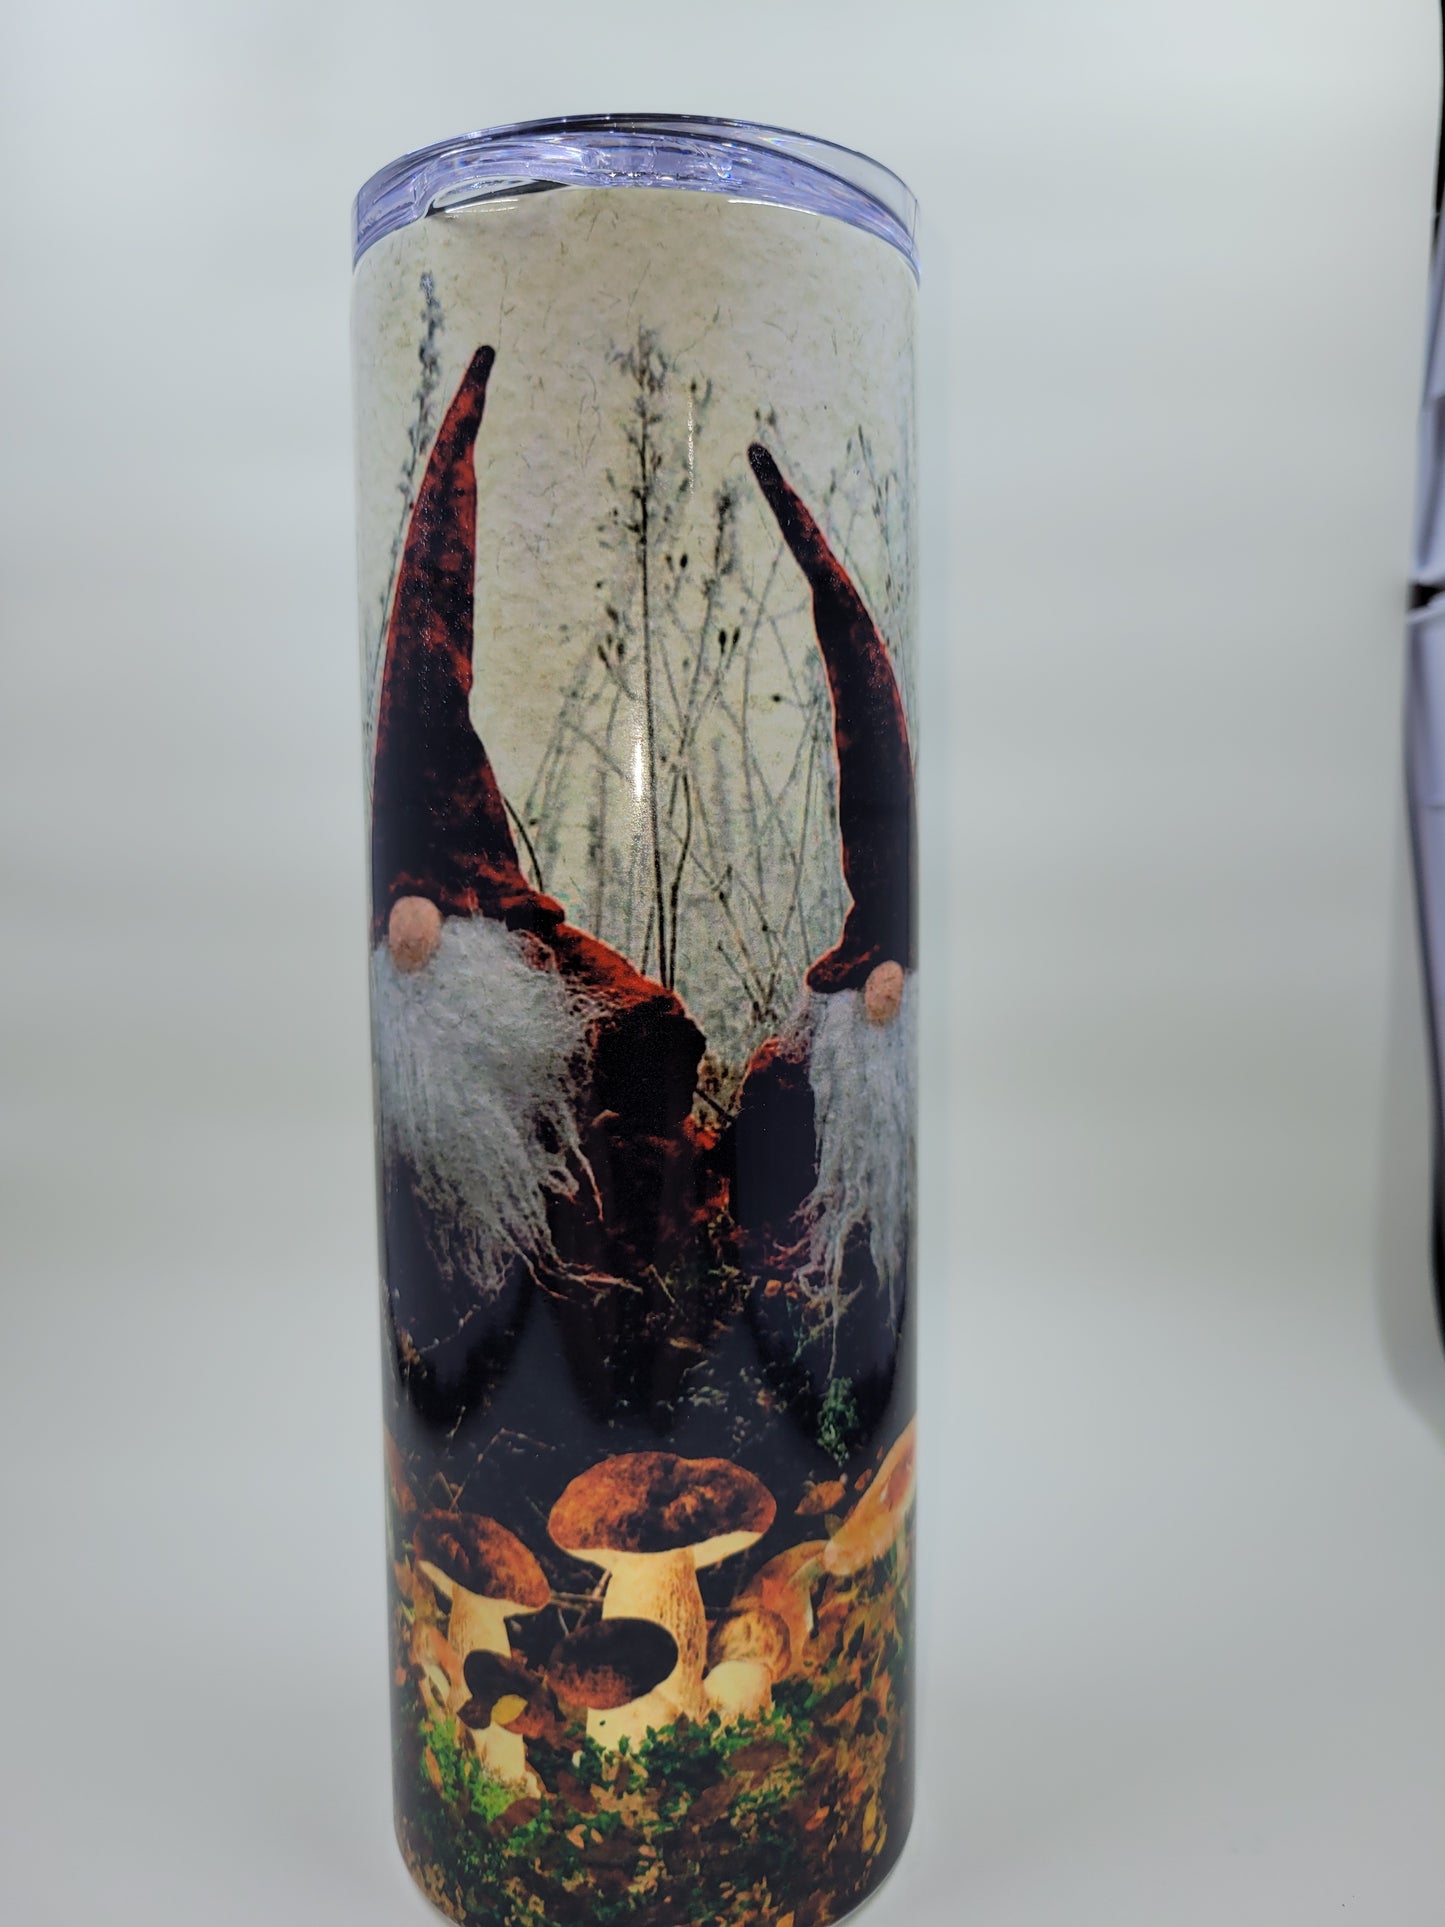 20 oz Stainless Steel tumbler with a gnome winter land image